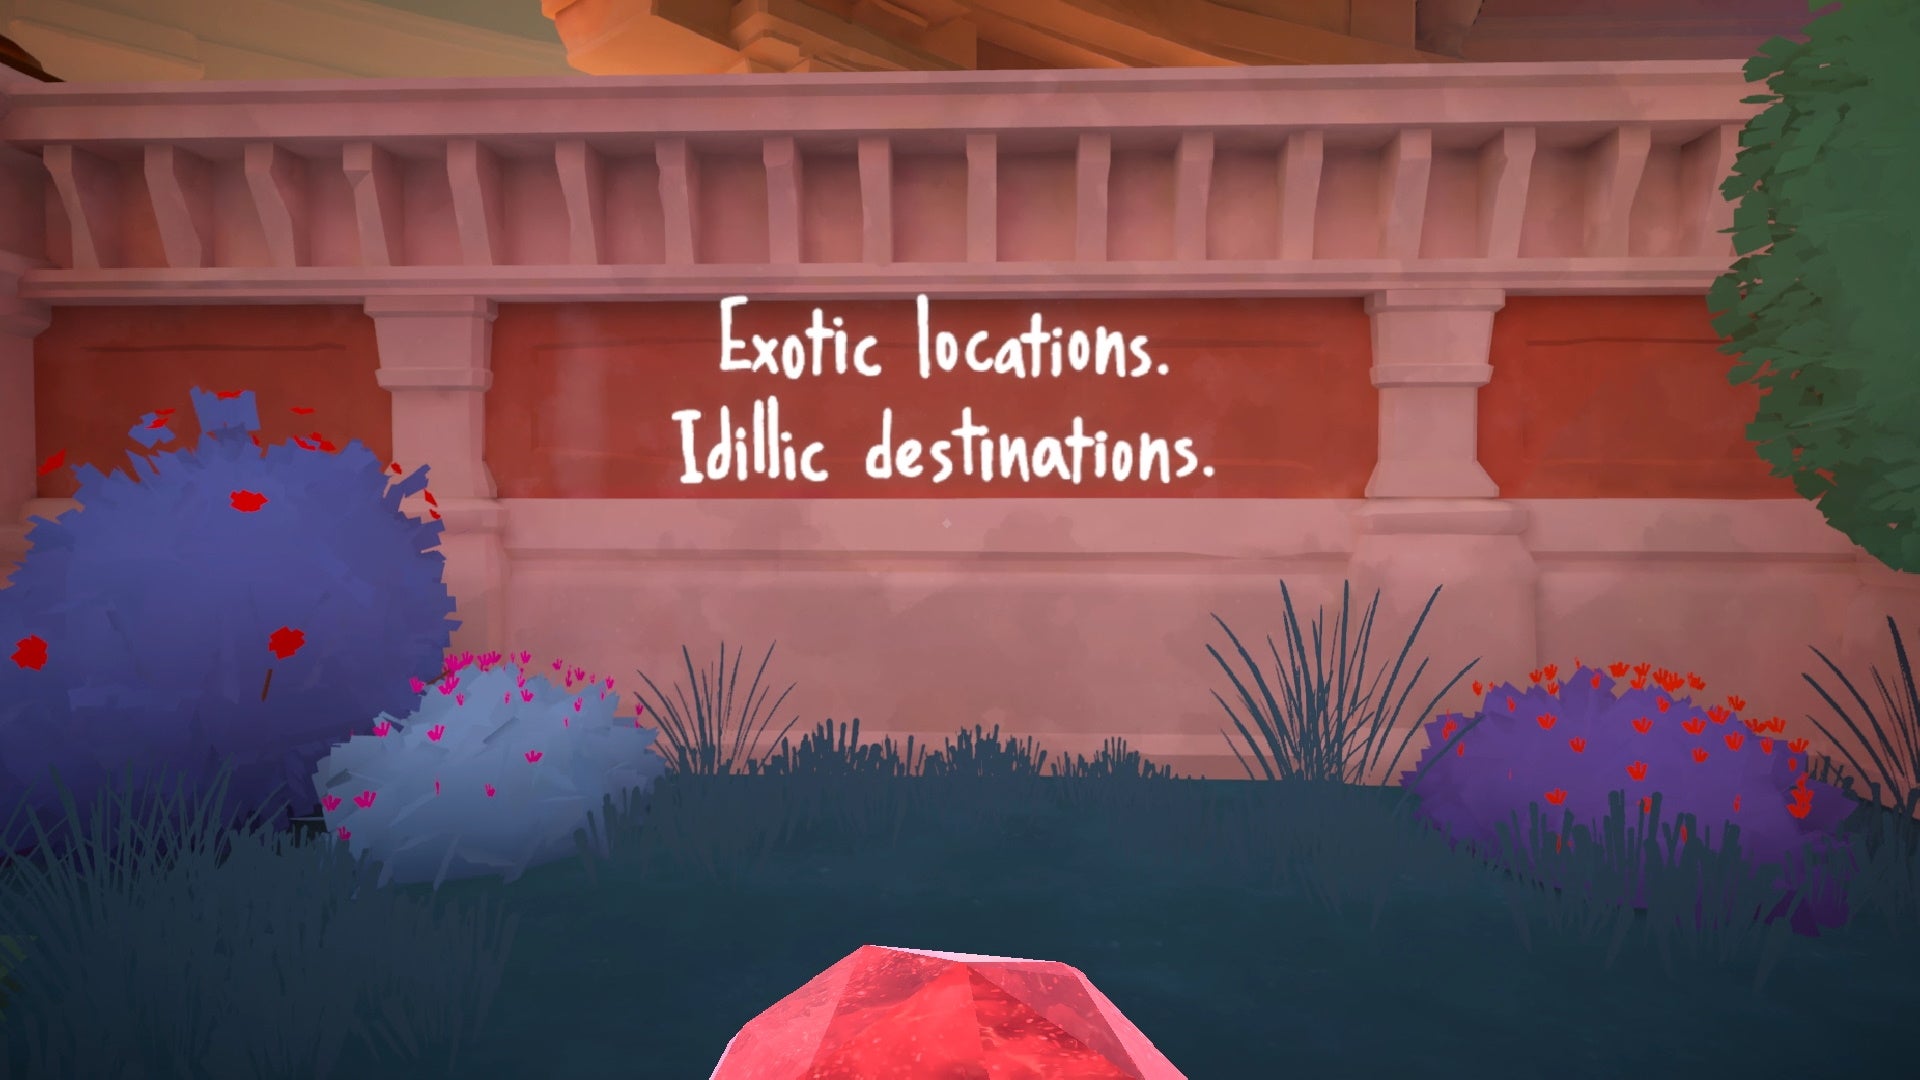 A screenshot of Maquette, where I stand with a red orb in my hand and look at some text that's appeared on the wall. It reads "Exotic locations. Idillic destinations." I am distraught at the typo